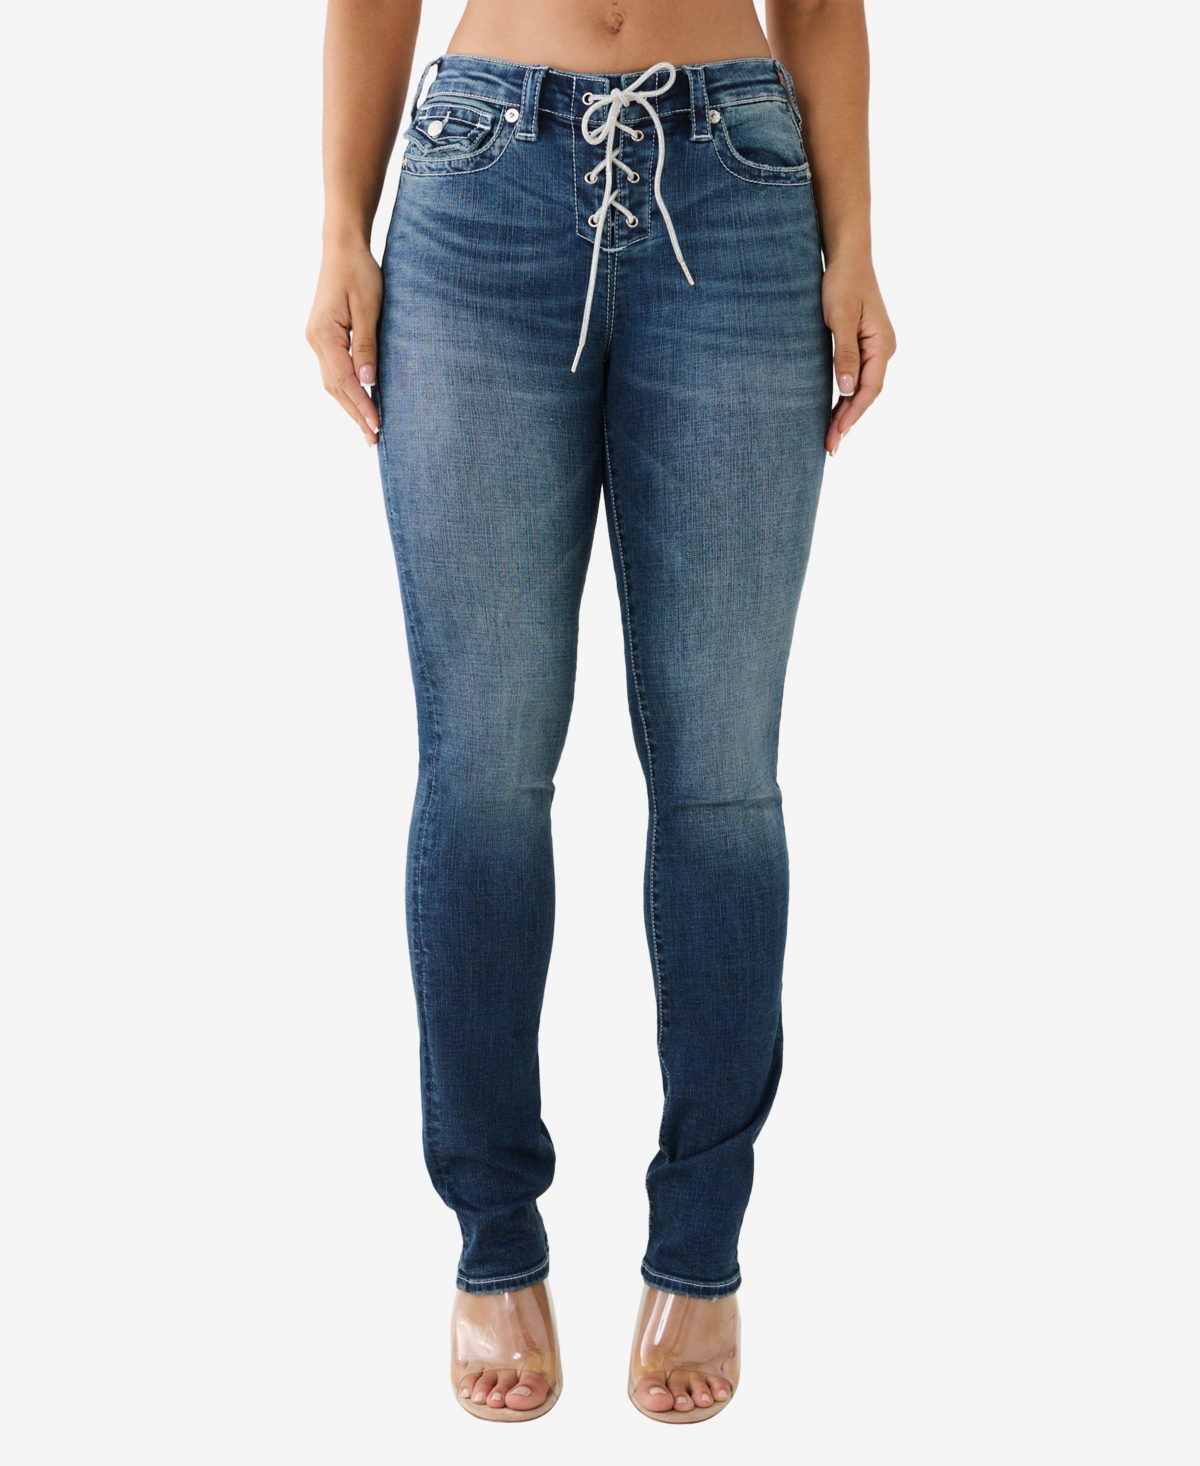 Women's Billie Lace Up Crystal Flap Straight Jeans - Love In A Mist